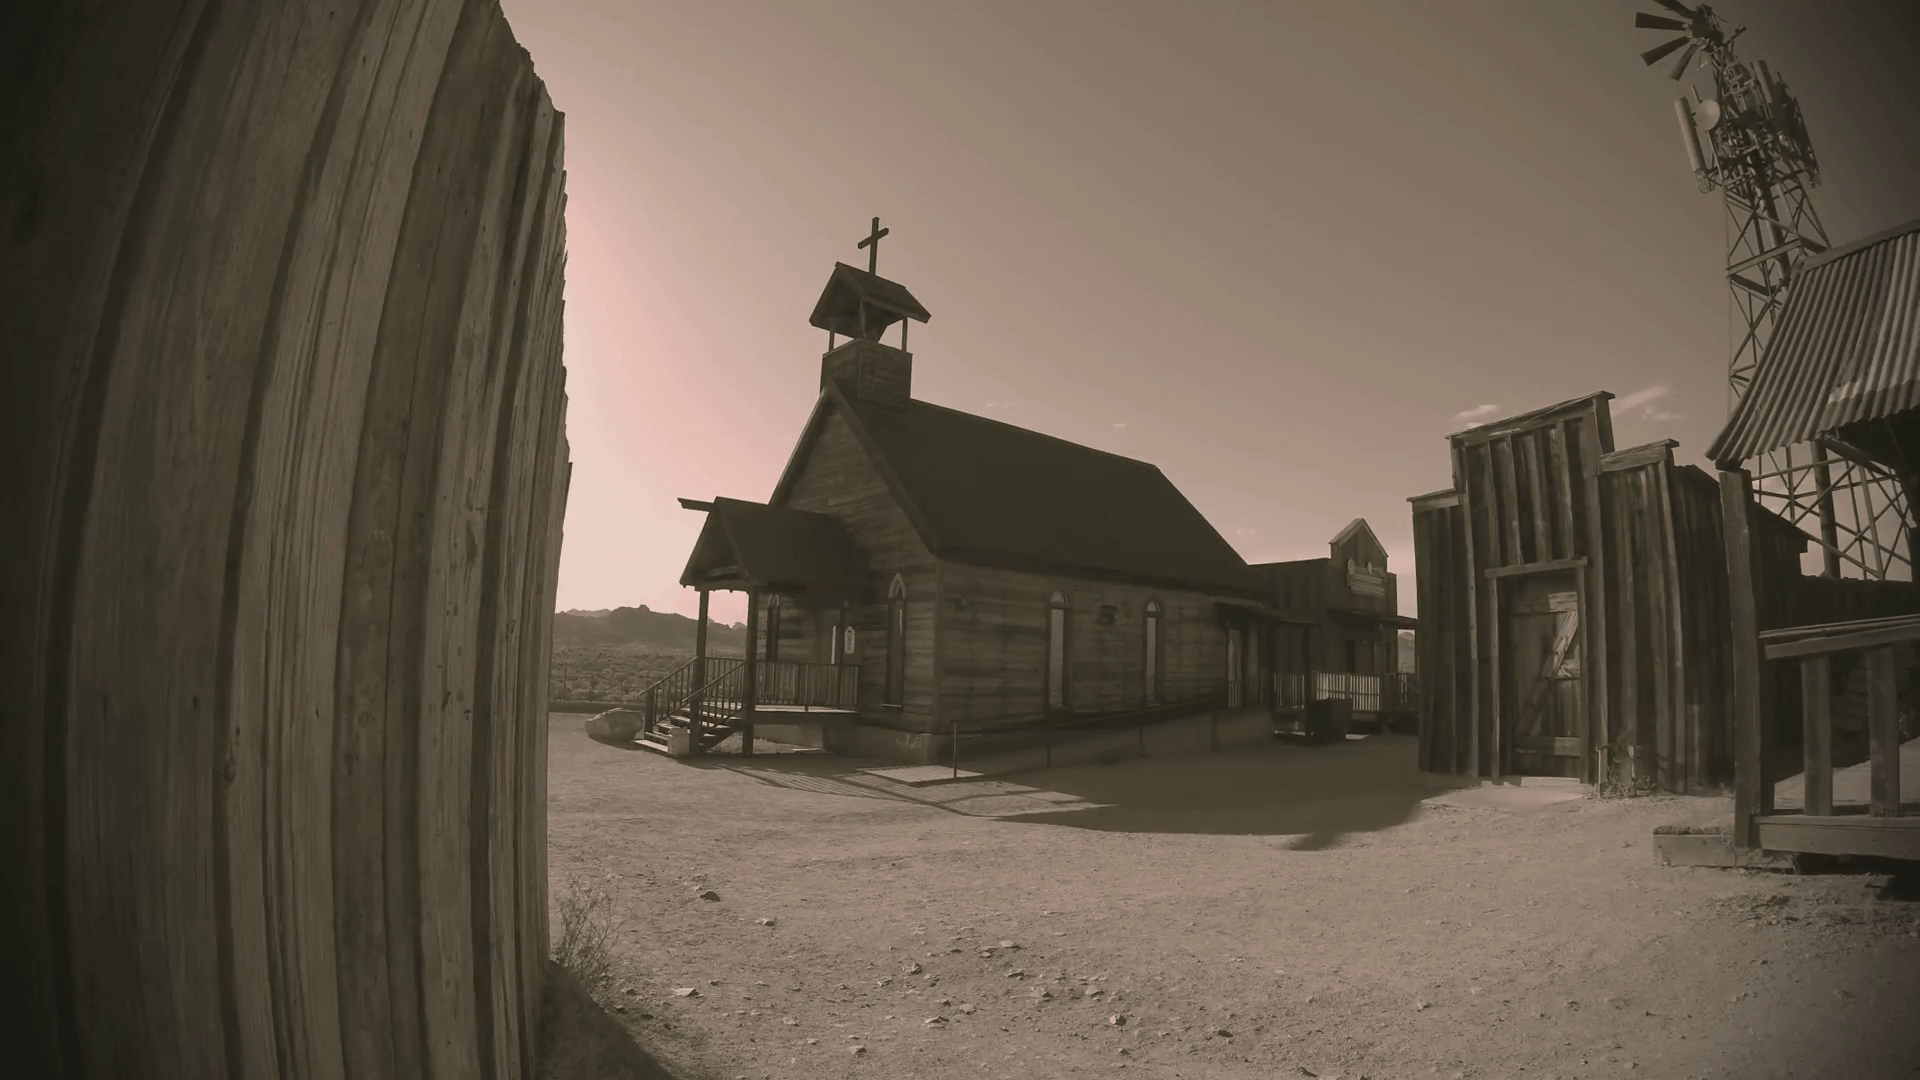 Old West Church And Buildings- Apache Junction AZ- Sepia Tone Stock